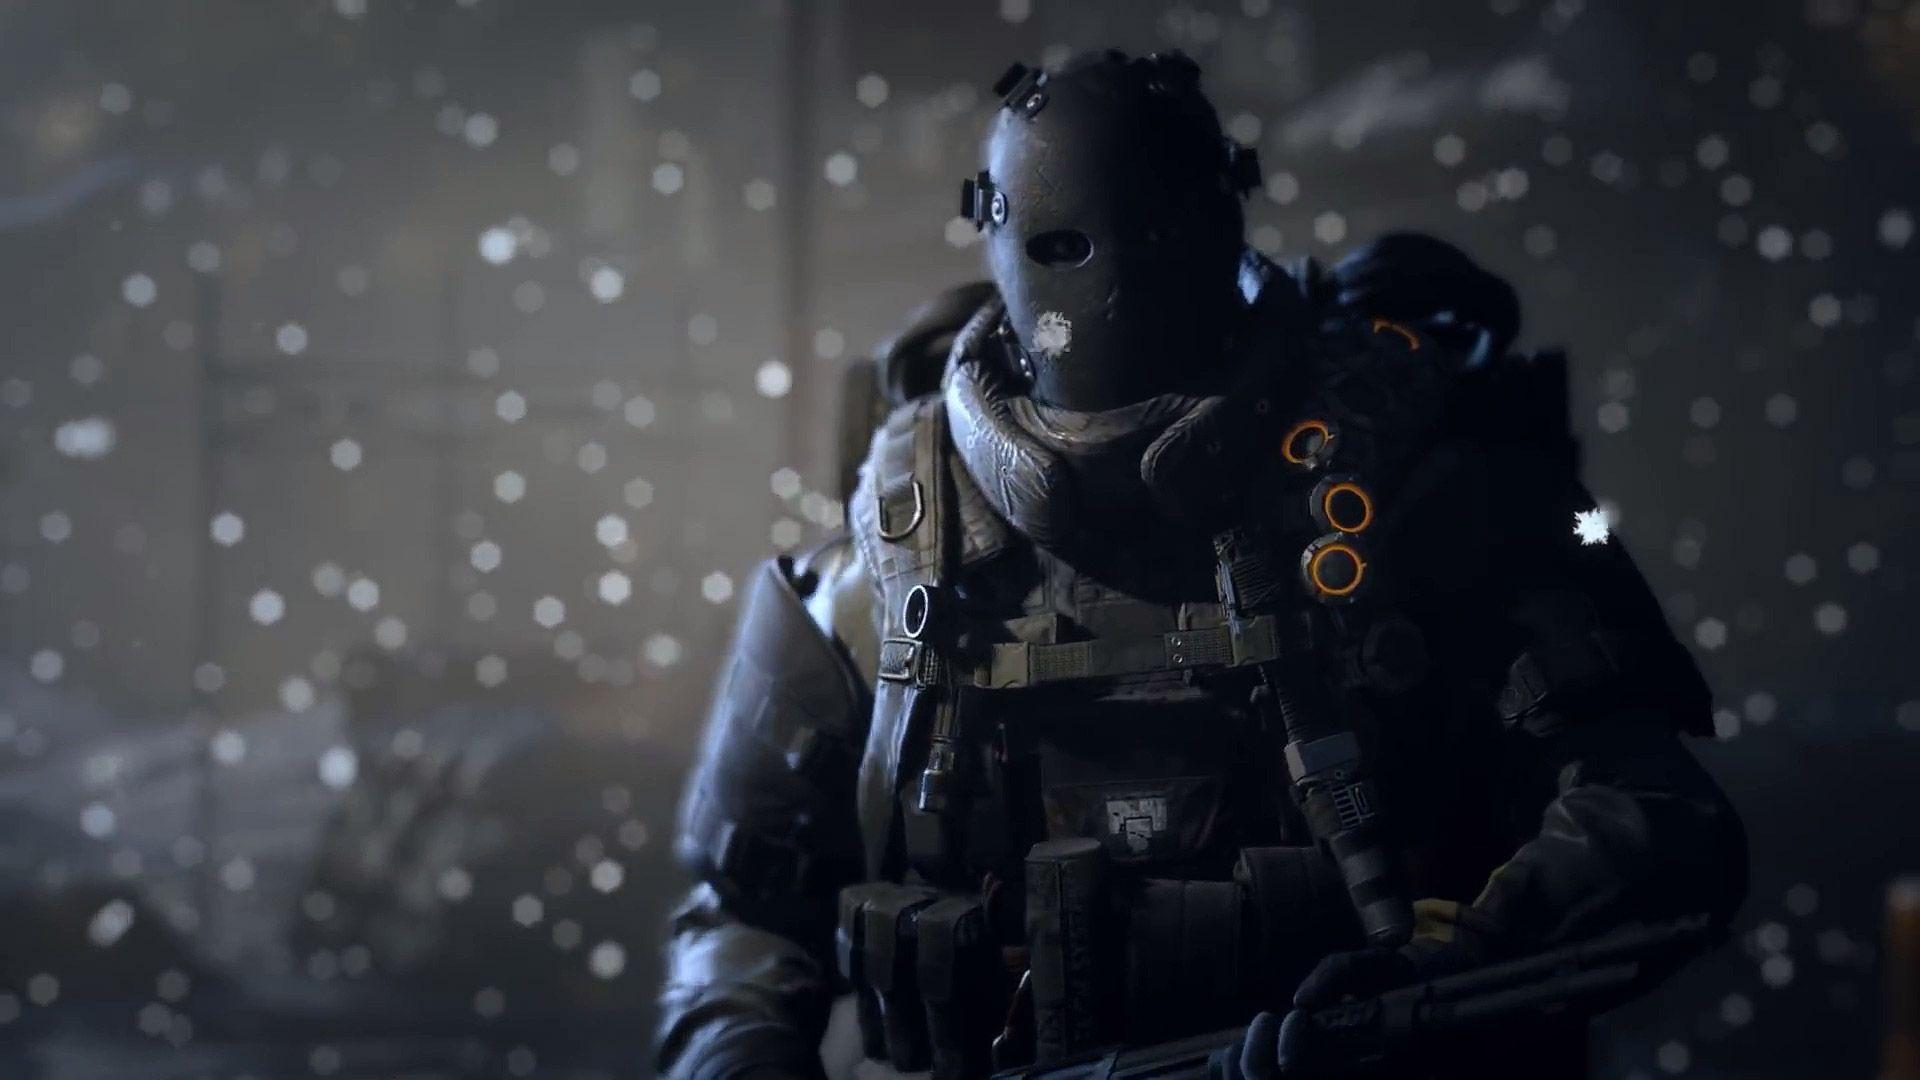 The Division Faction Logo - Survival DLC New Faction Name Appearance Confirmed!